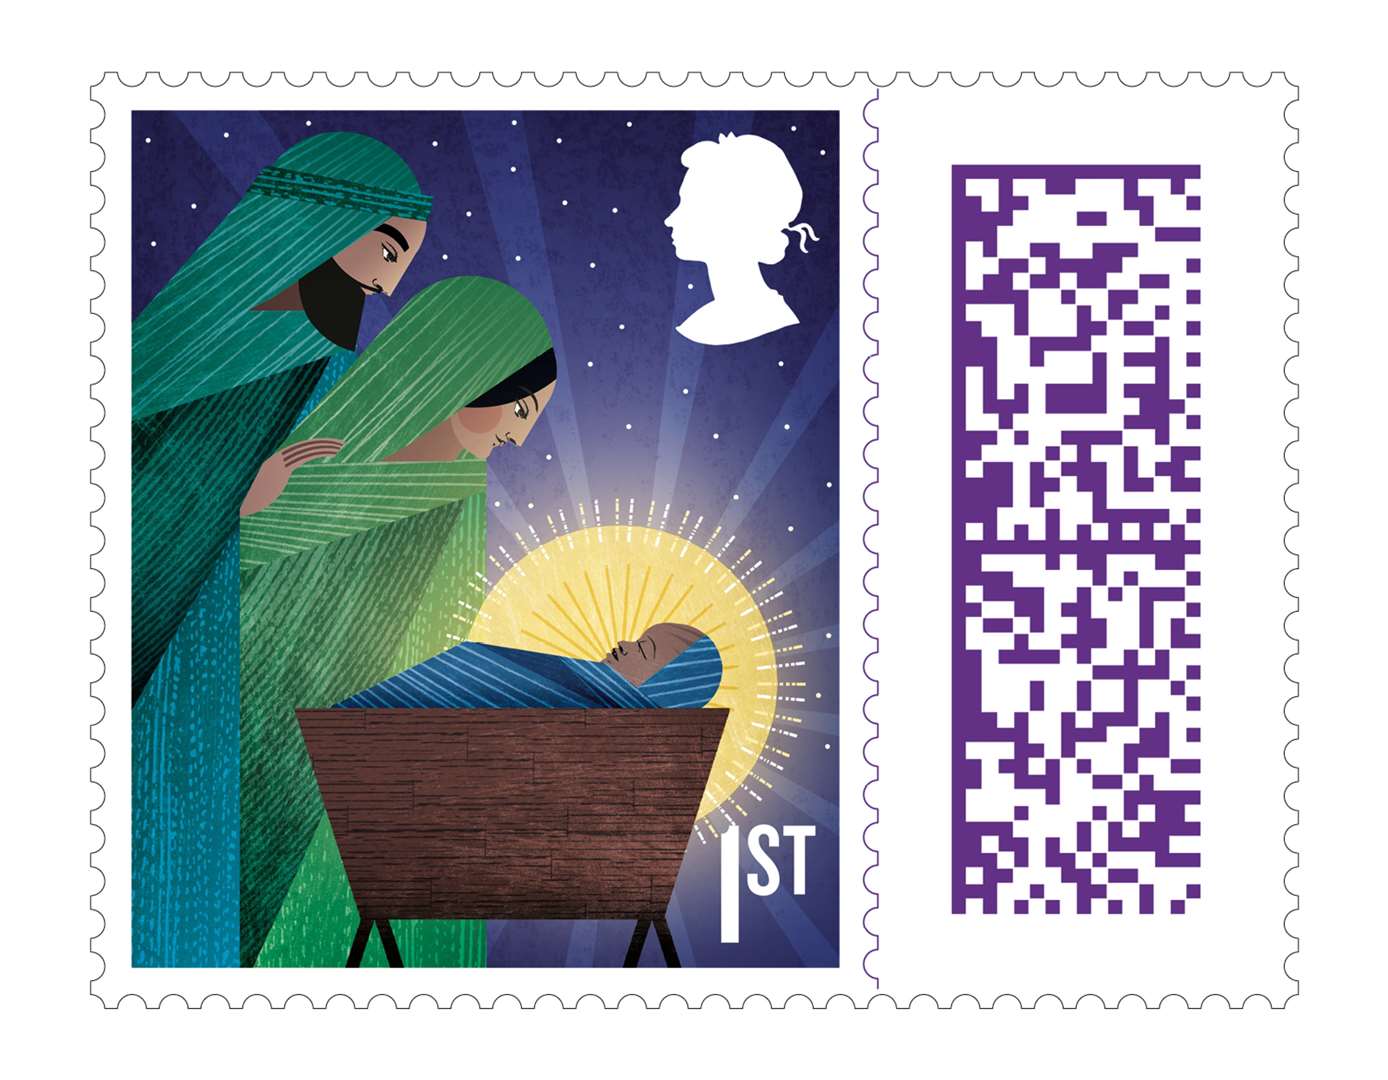 While new Christmas stamps carry a barcode, there is no deadline to swap-out special release stamps